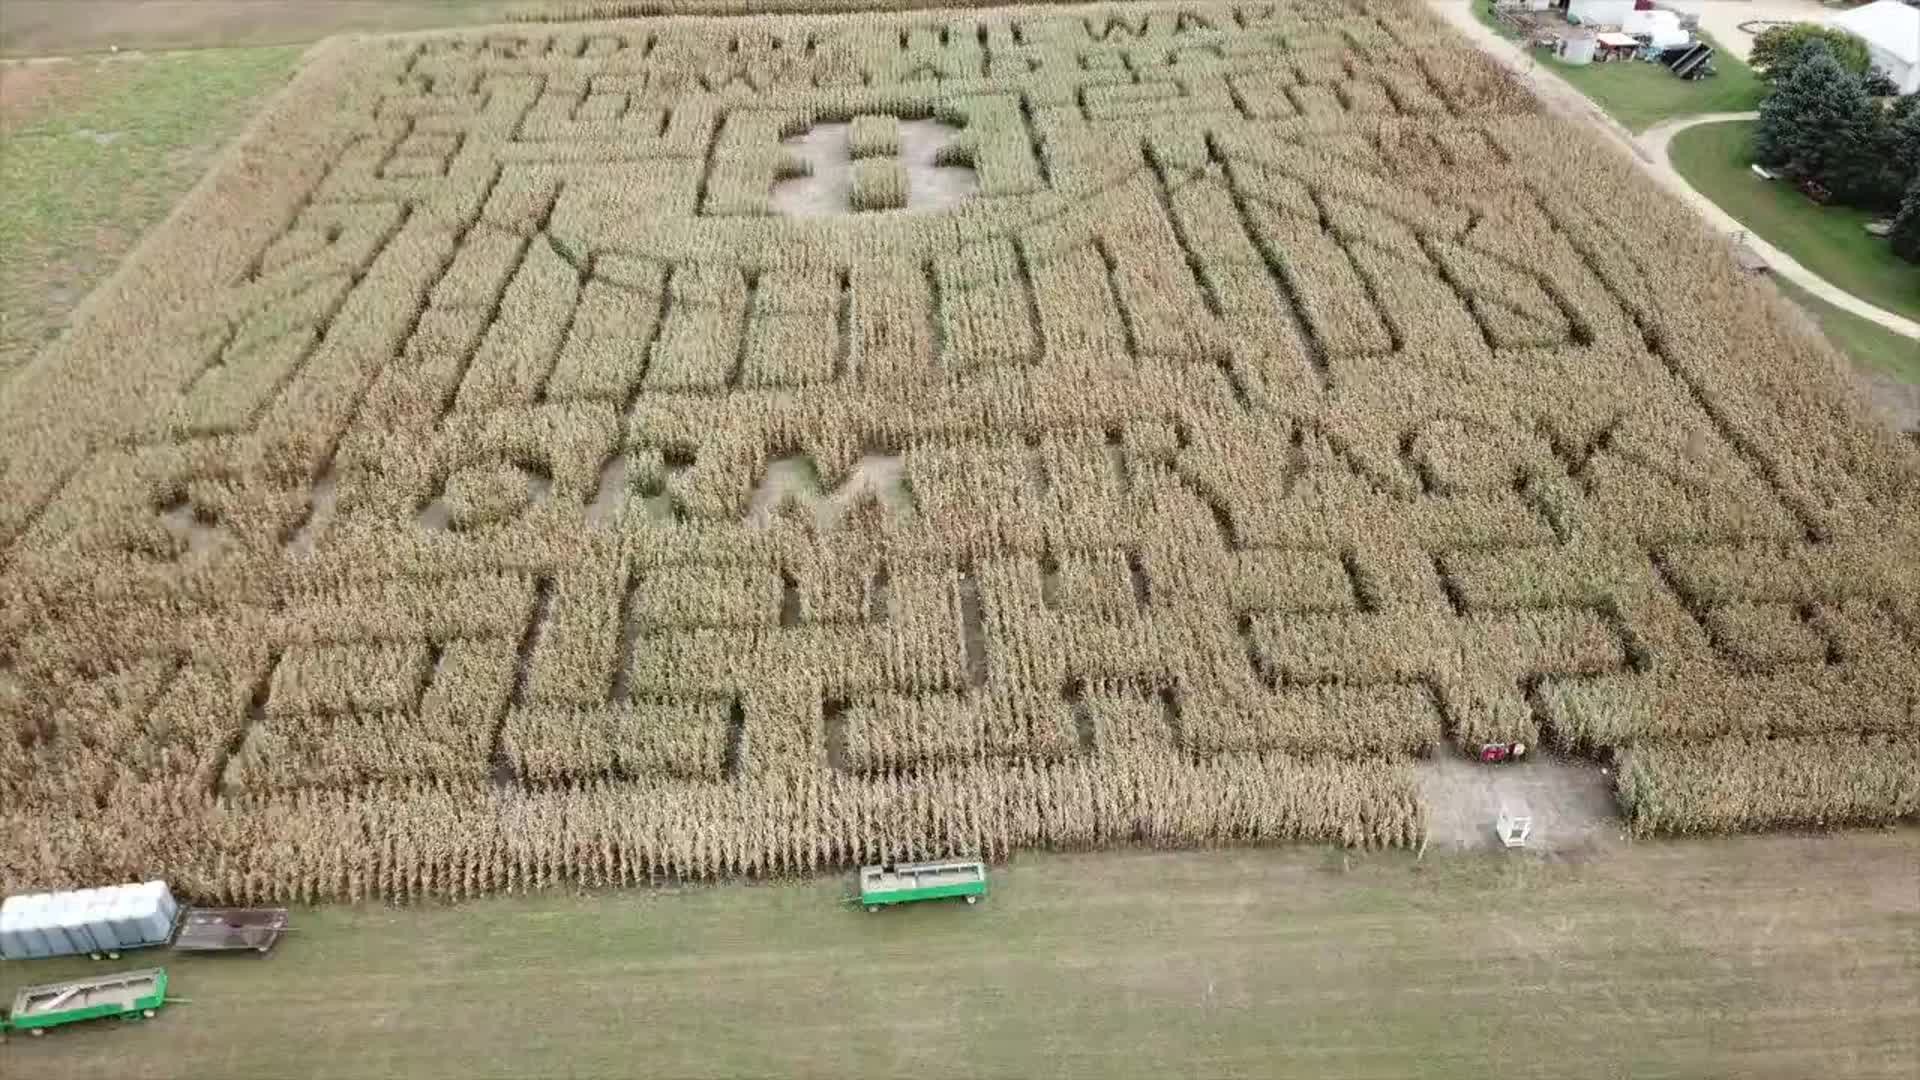 Fly over the Pride of the Wapsi corn maze